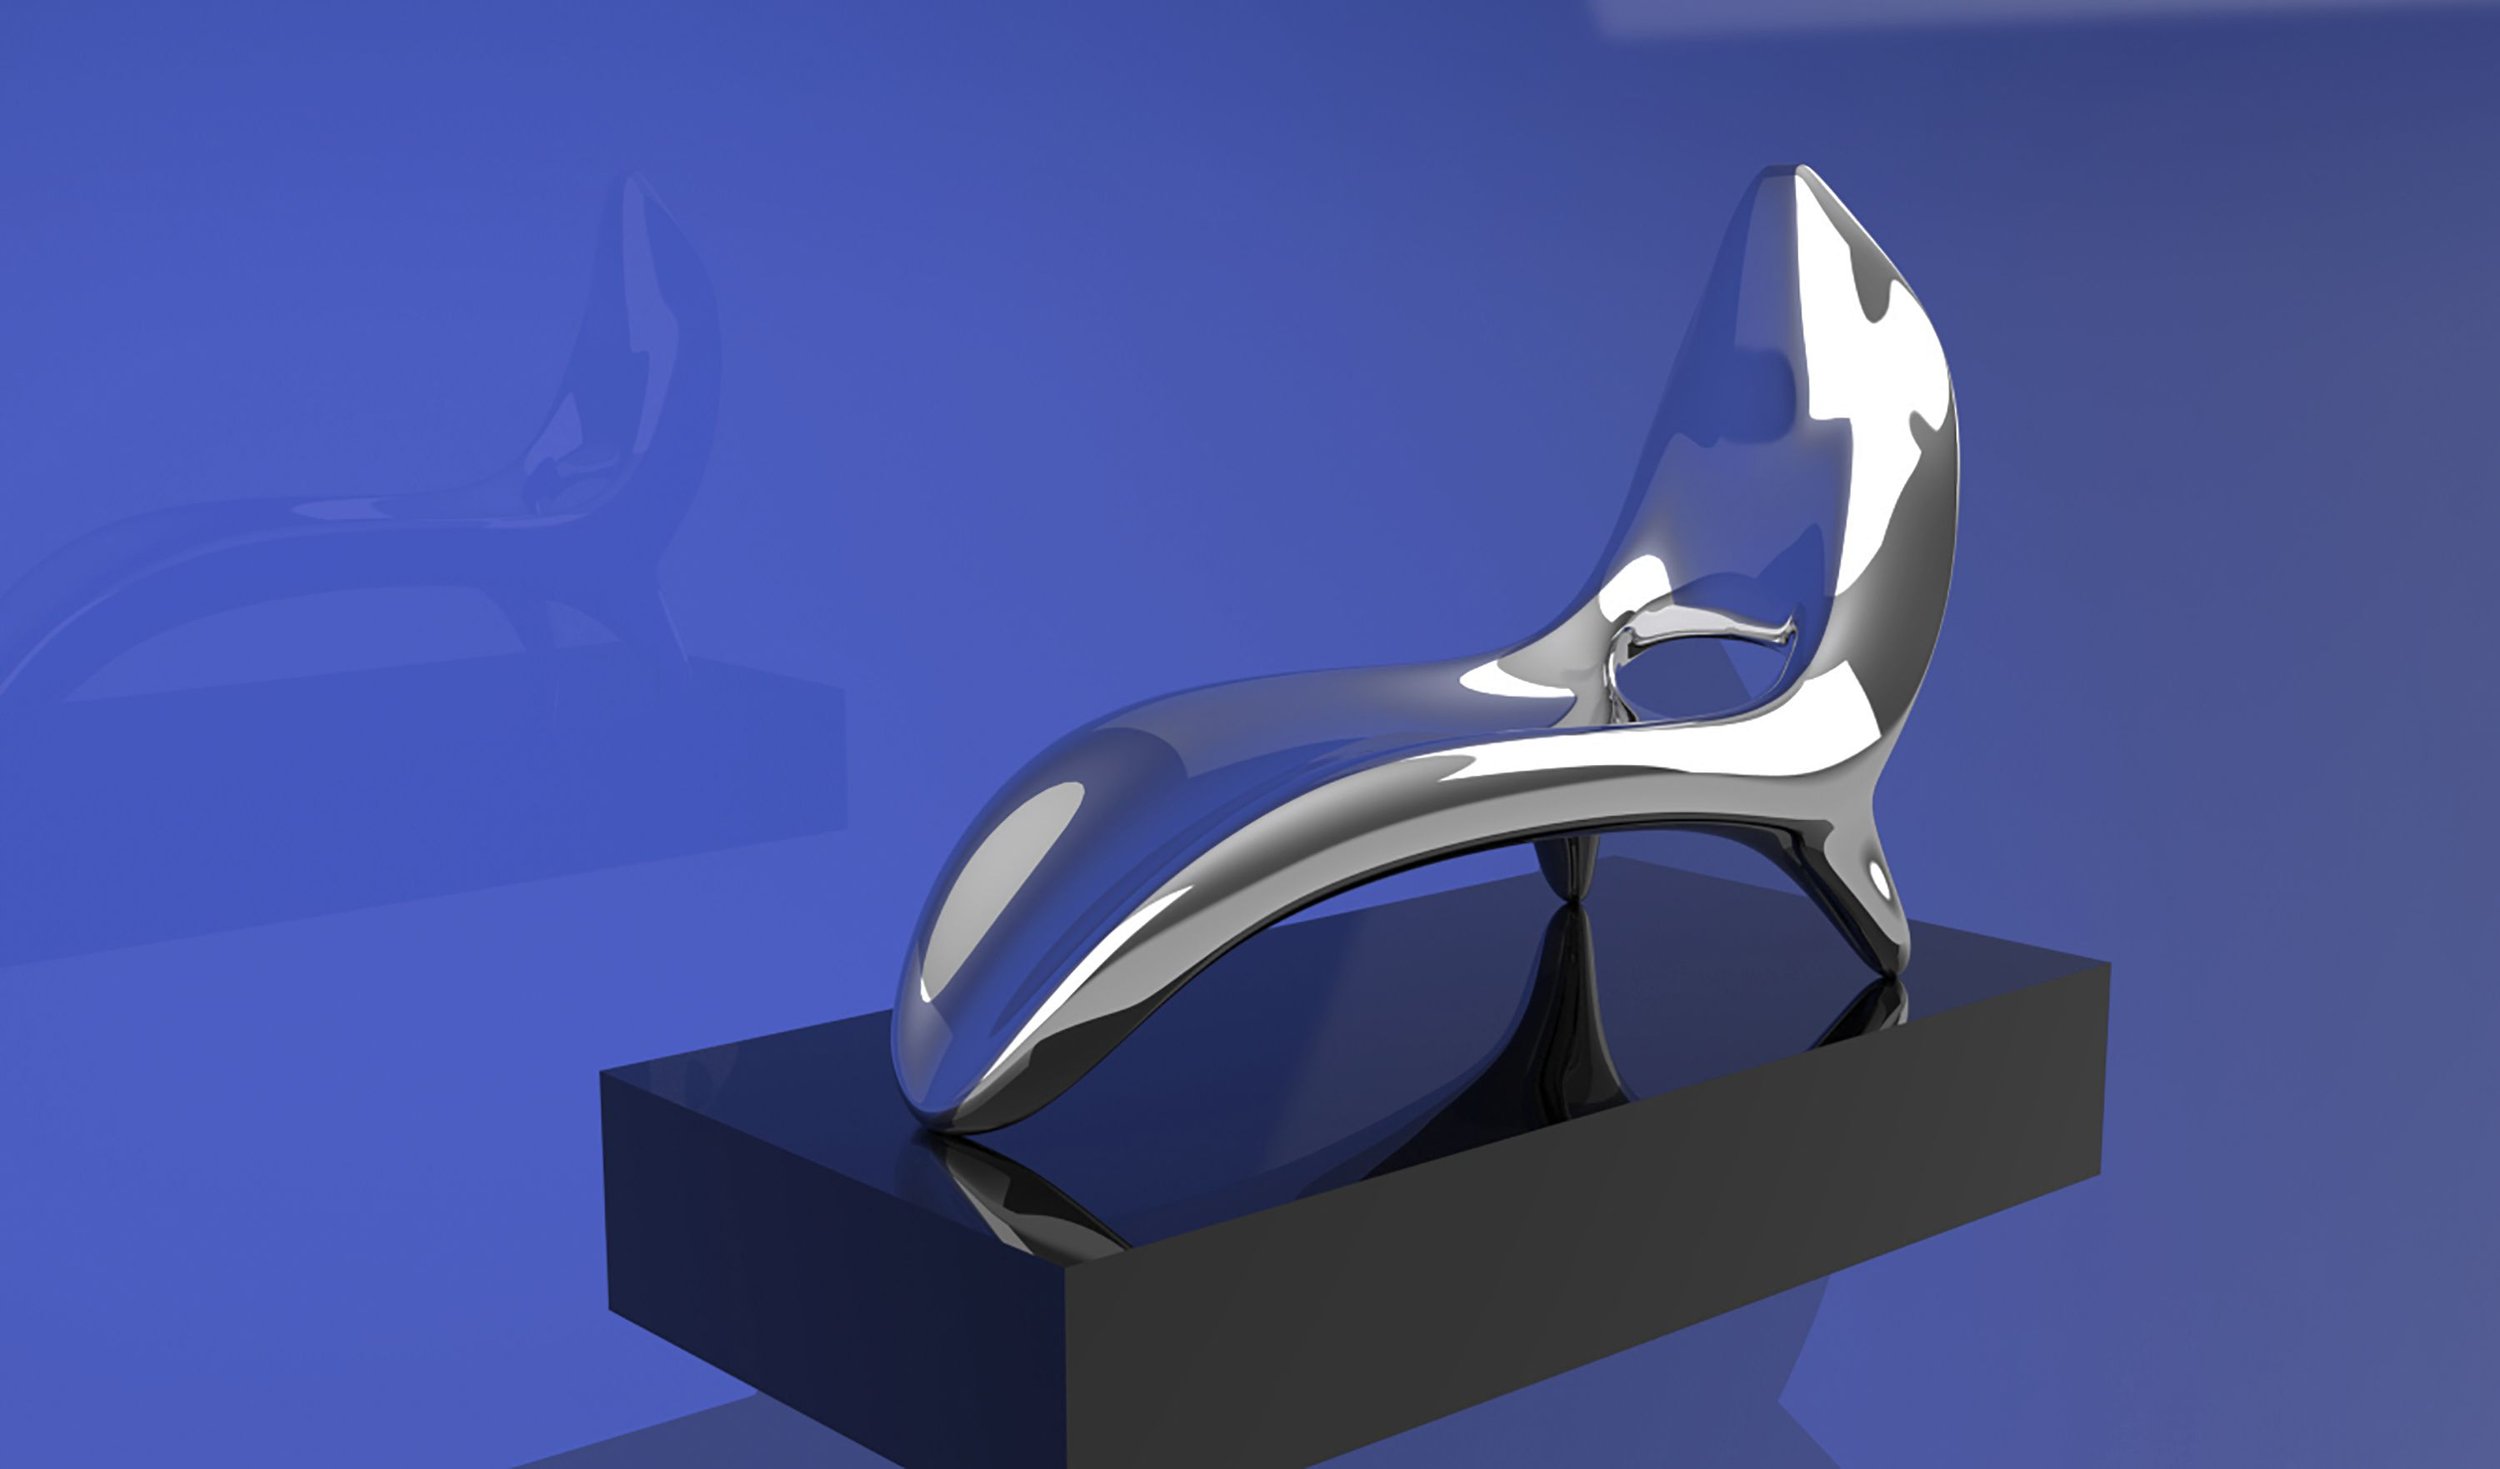 Spartan Lounge, 43" x 27" x 62", Polished Stainless Steel (render)